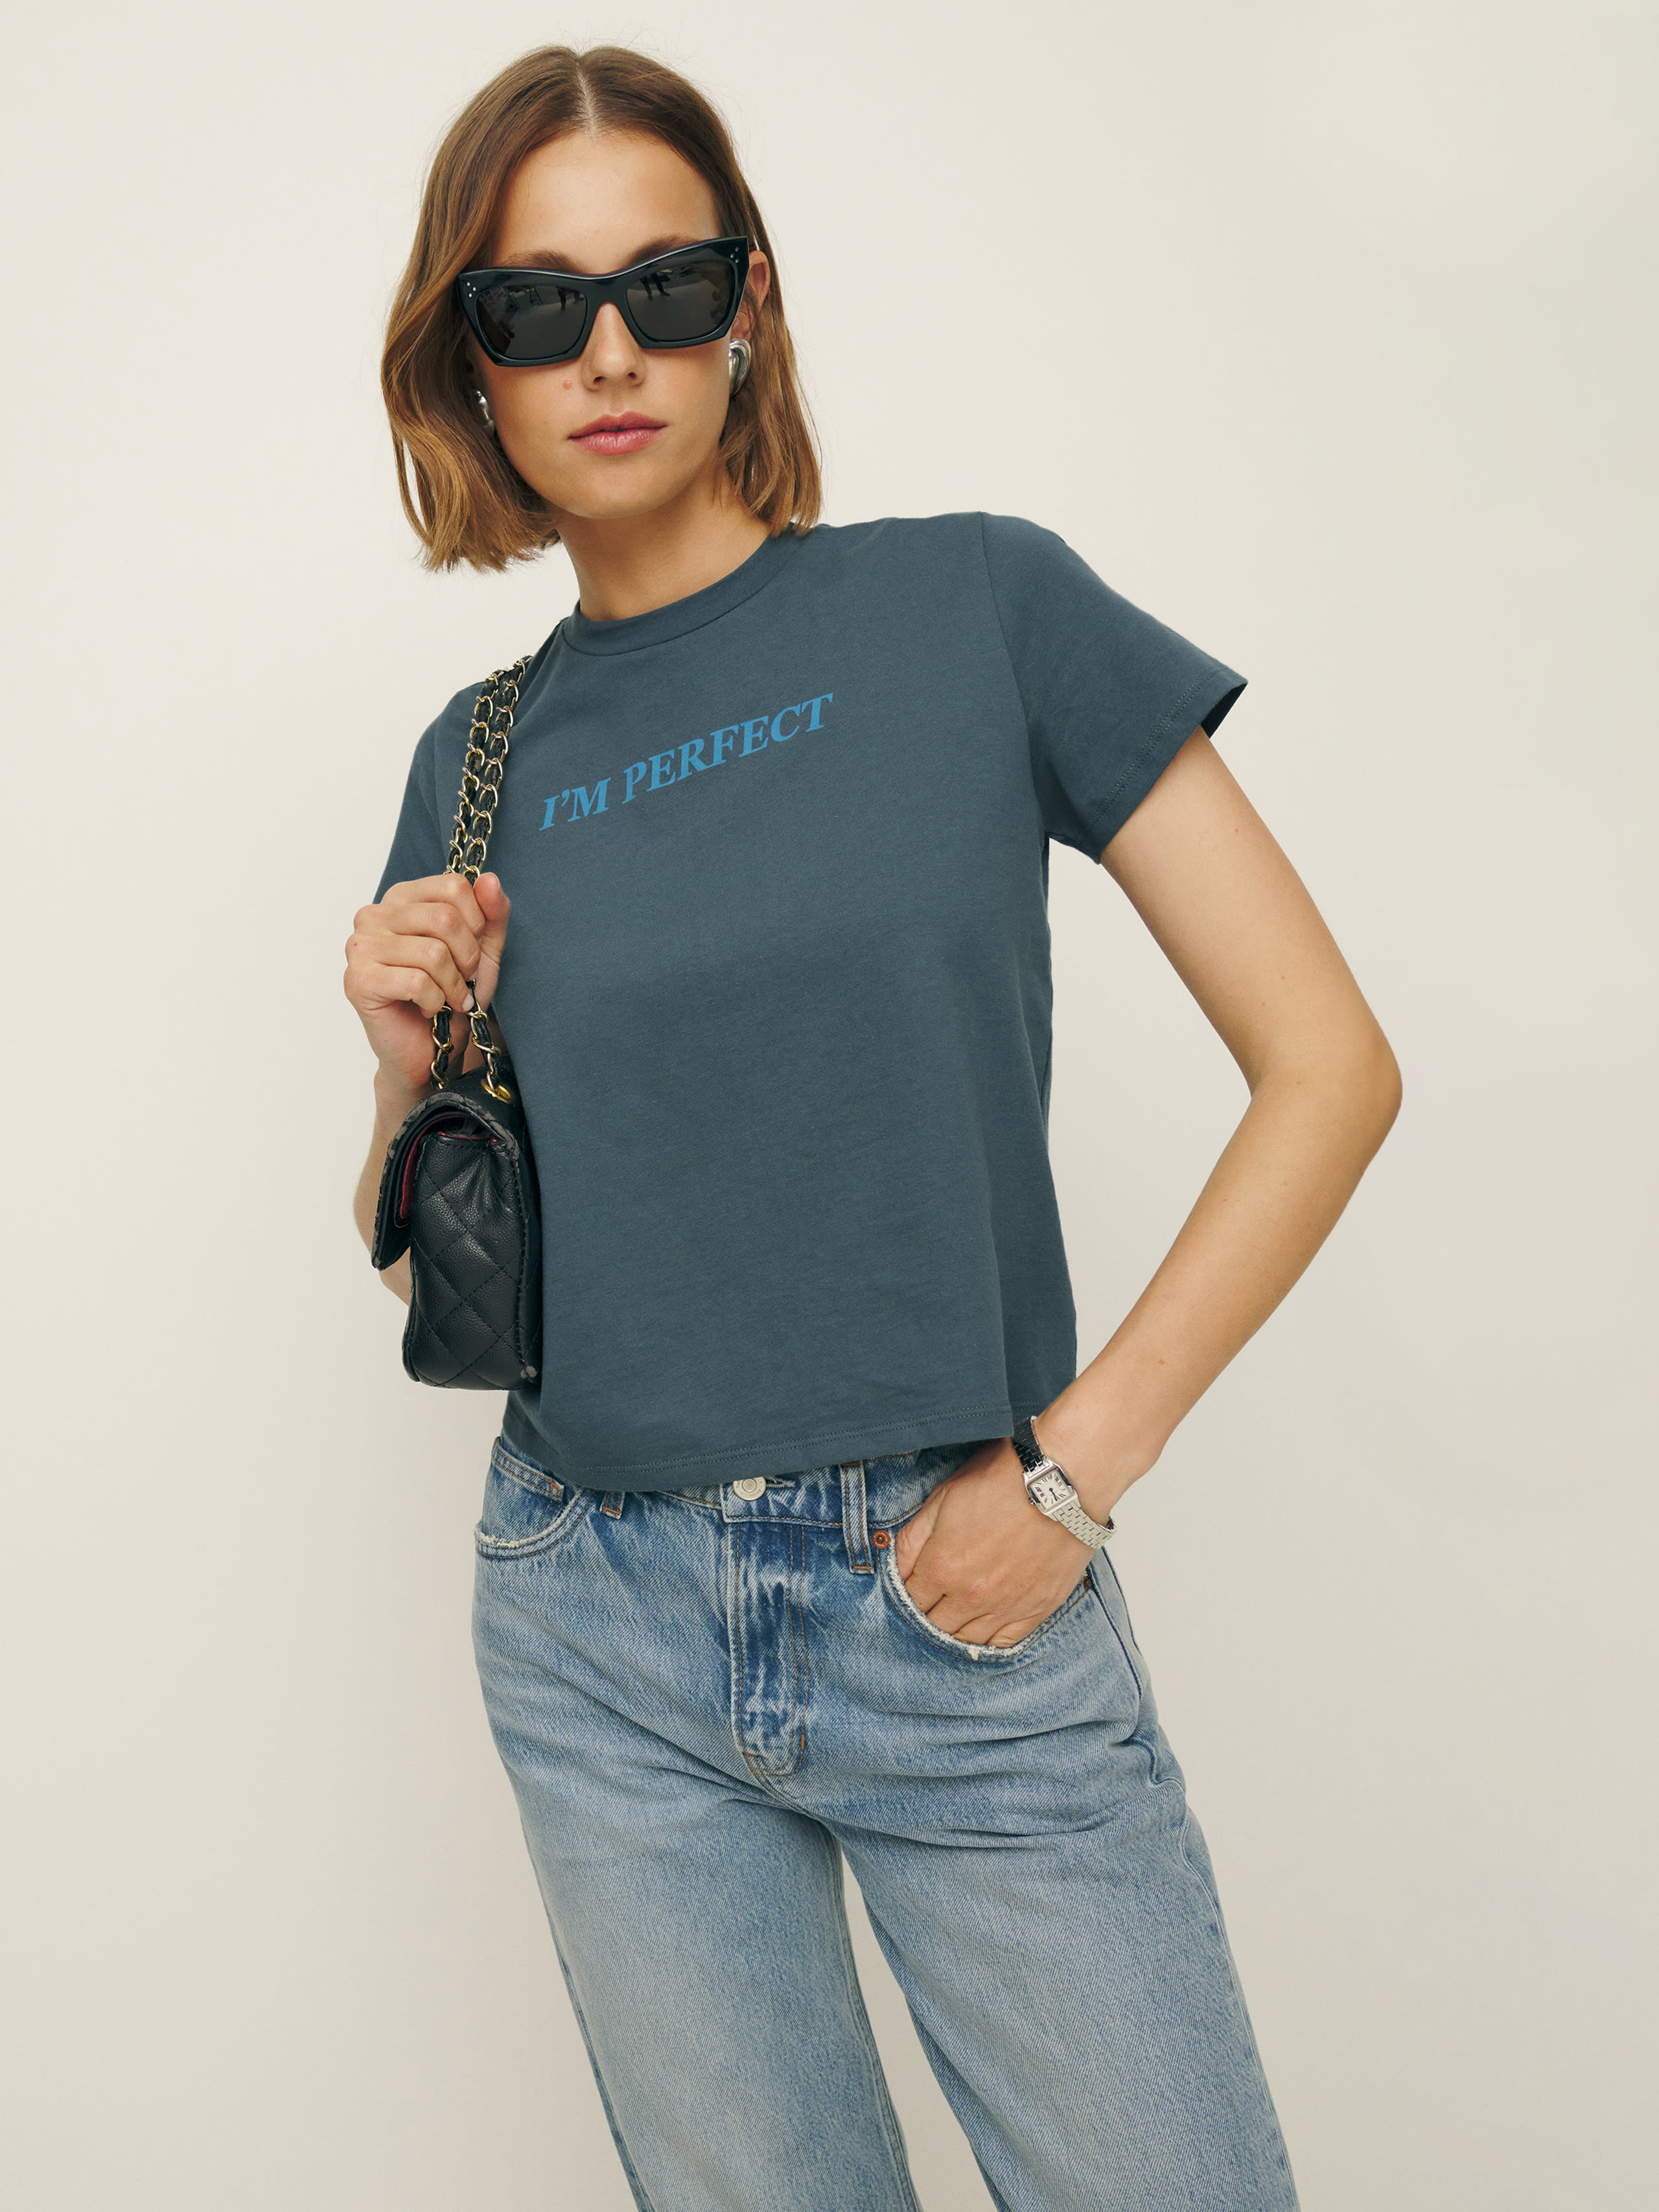 Reformation Classic Crew Tee In I'm Perfect